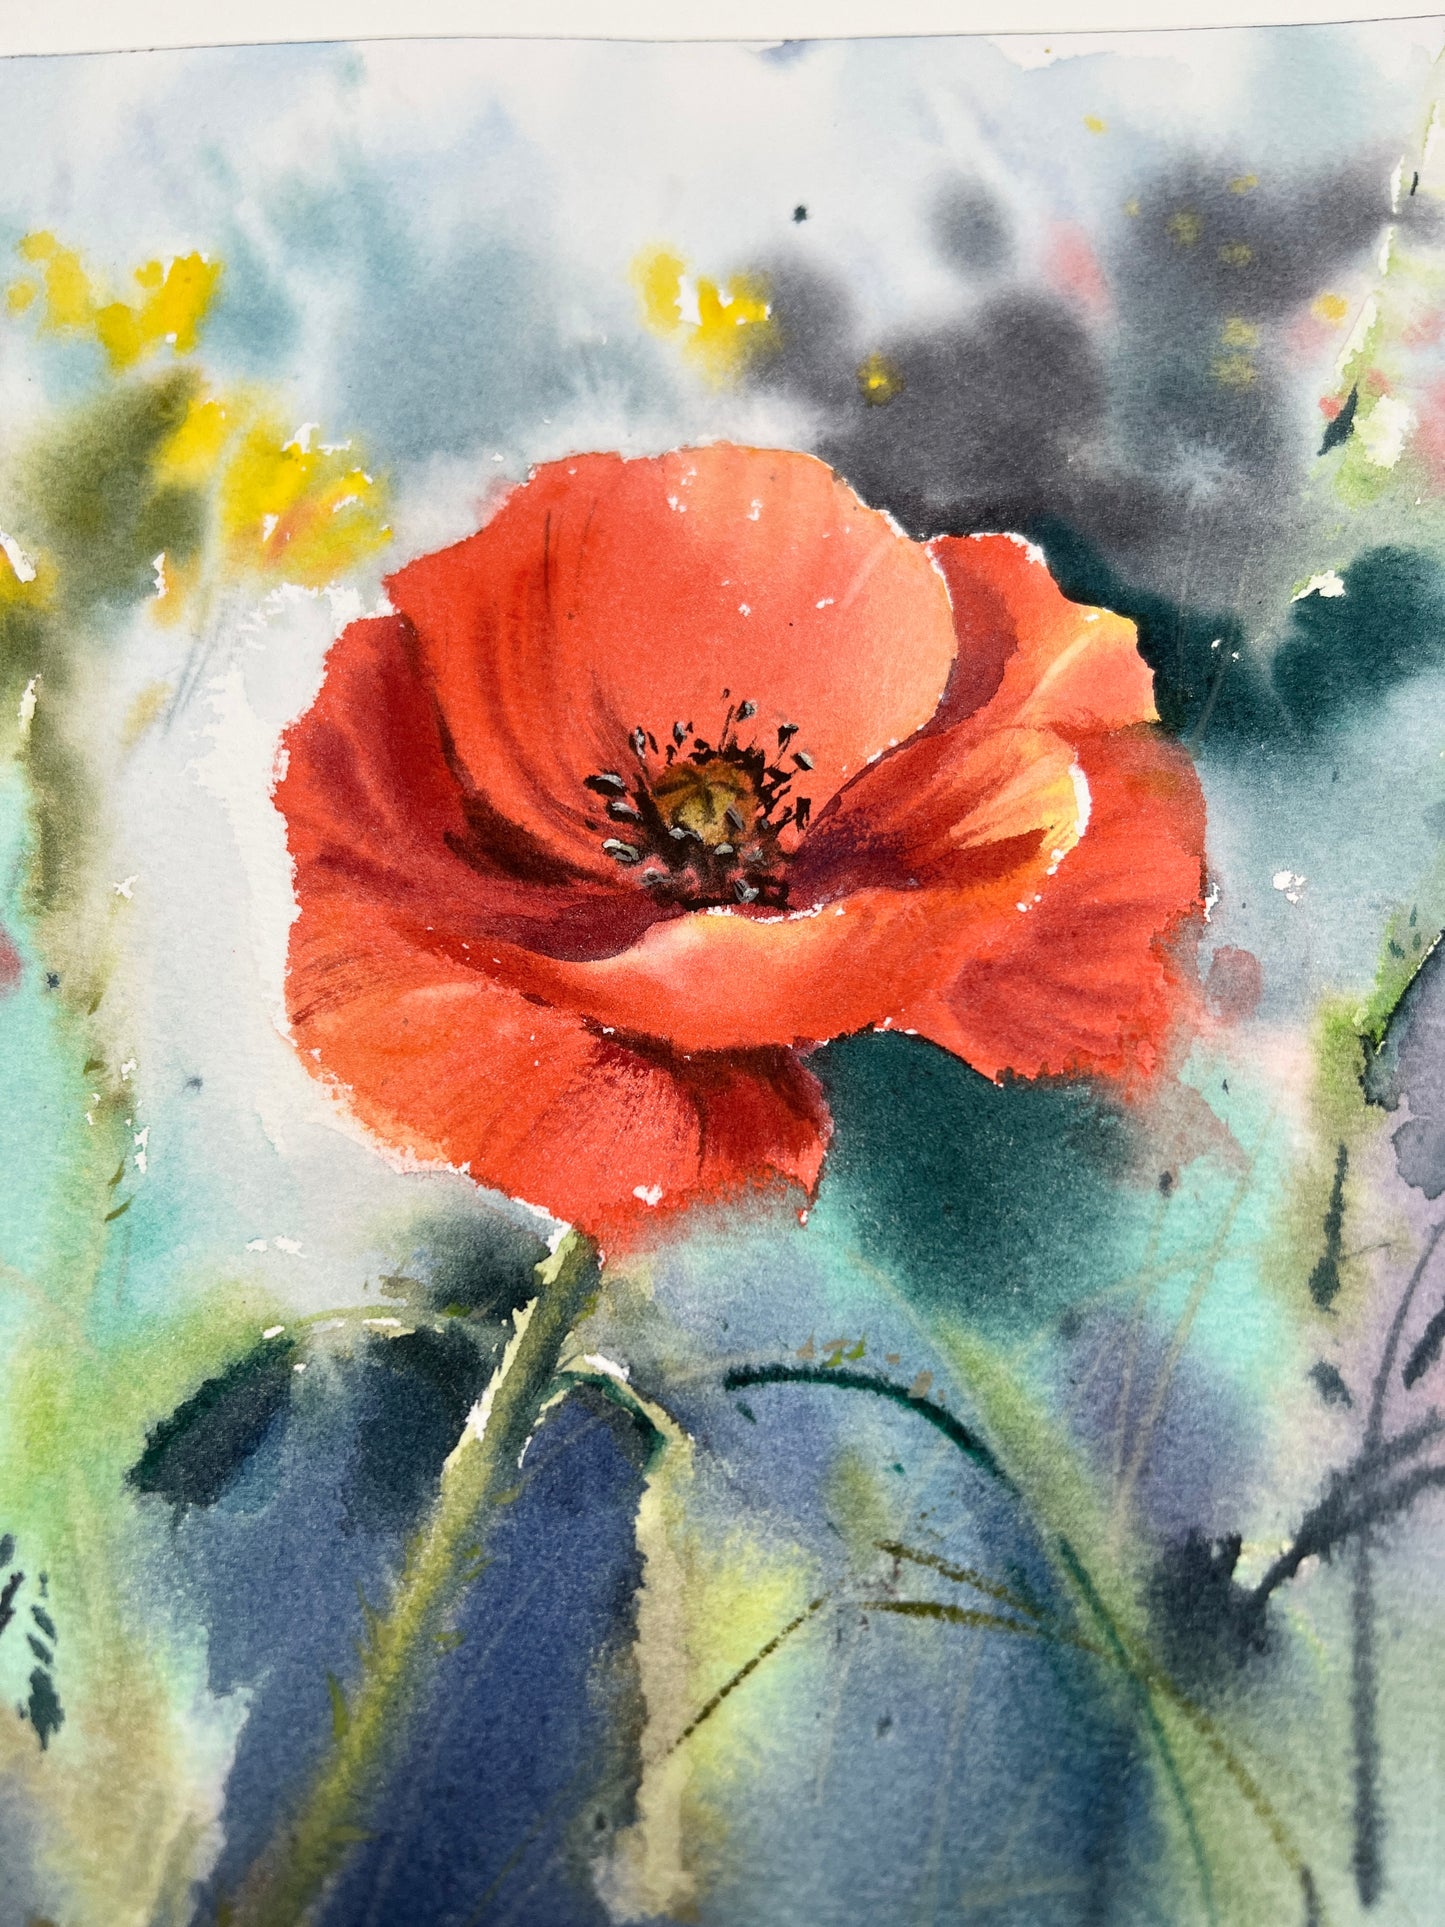 Red Poppy Flower Watercolor Painting, Original Artwork, Botanical Floral Abstract, Gift, 12x9"